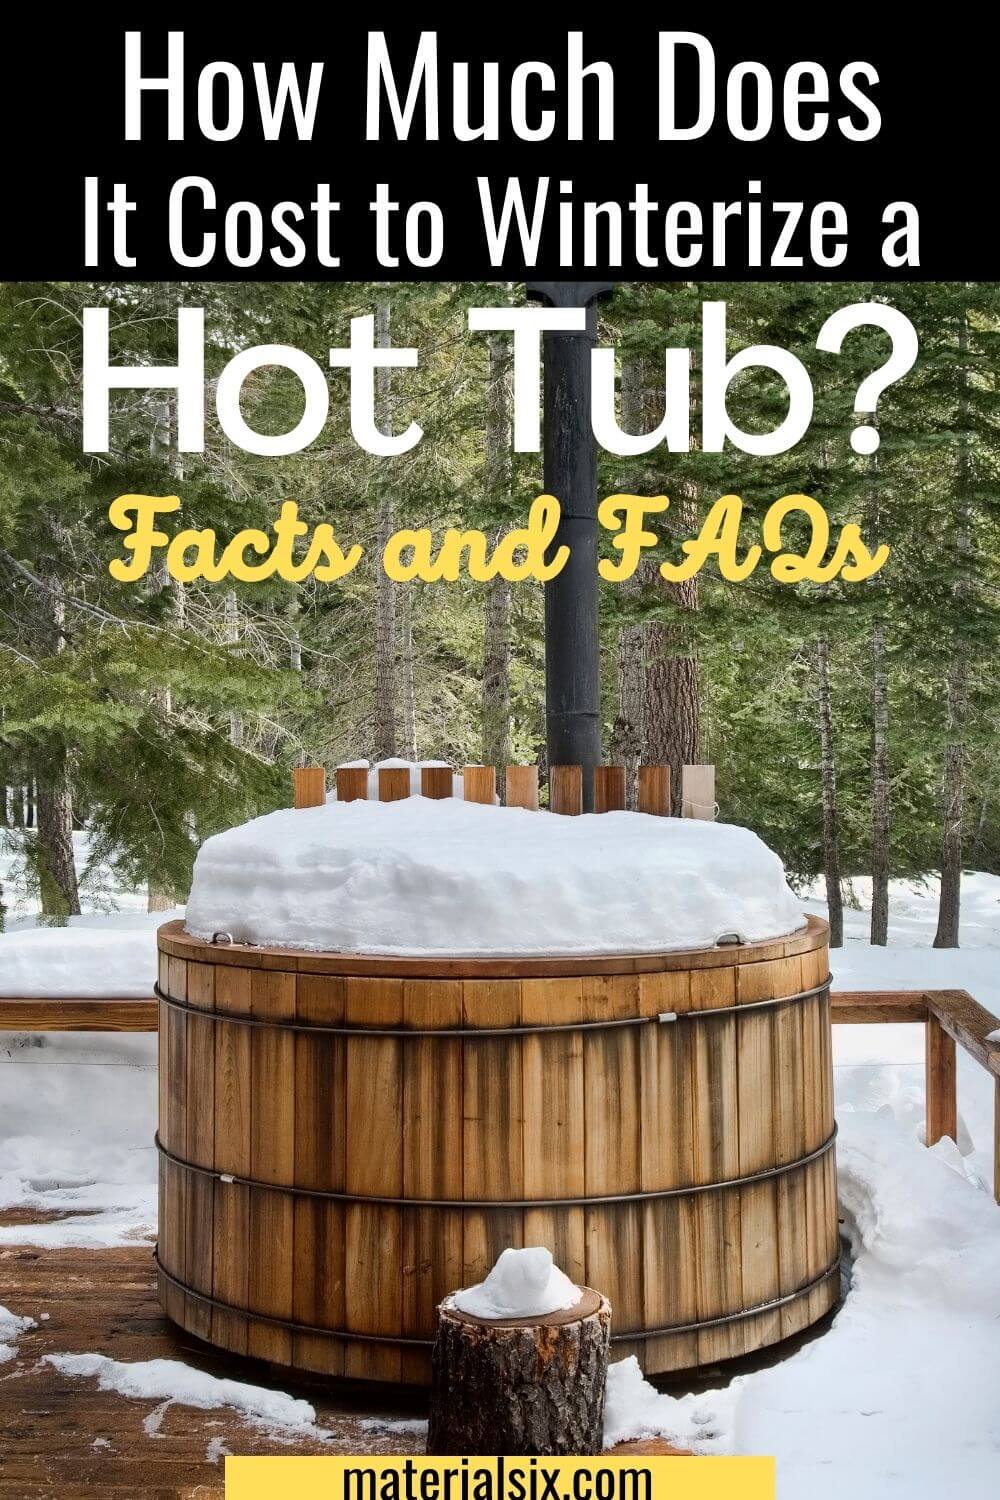 How Much Does It Cost to Winterize a Hot Tub Facts and FAQs 